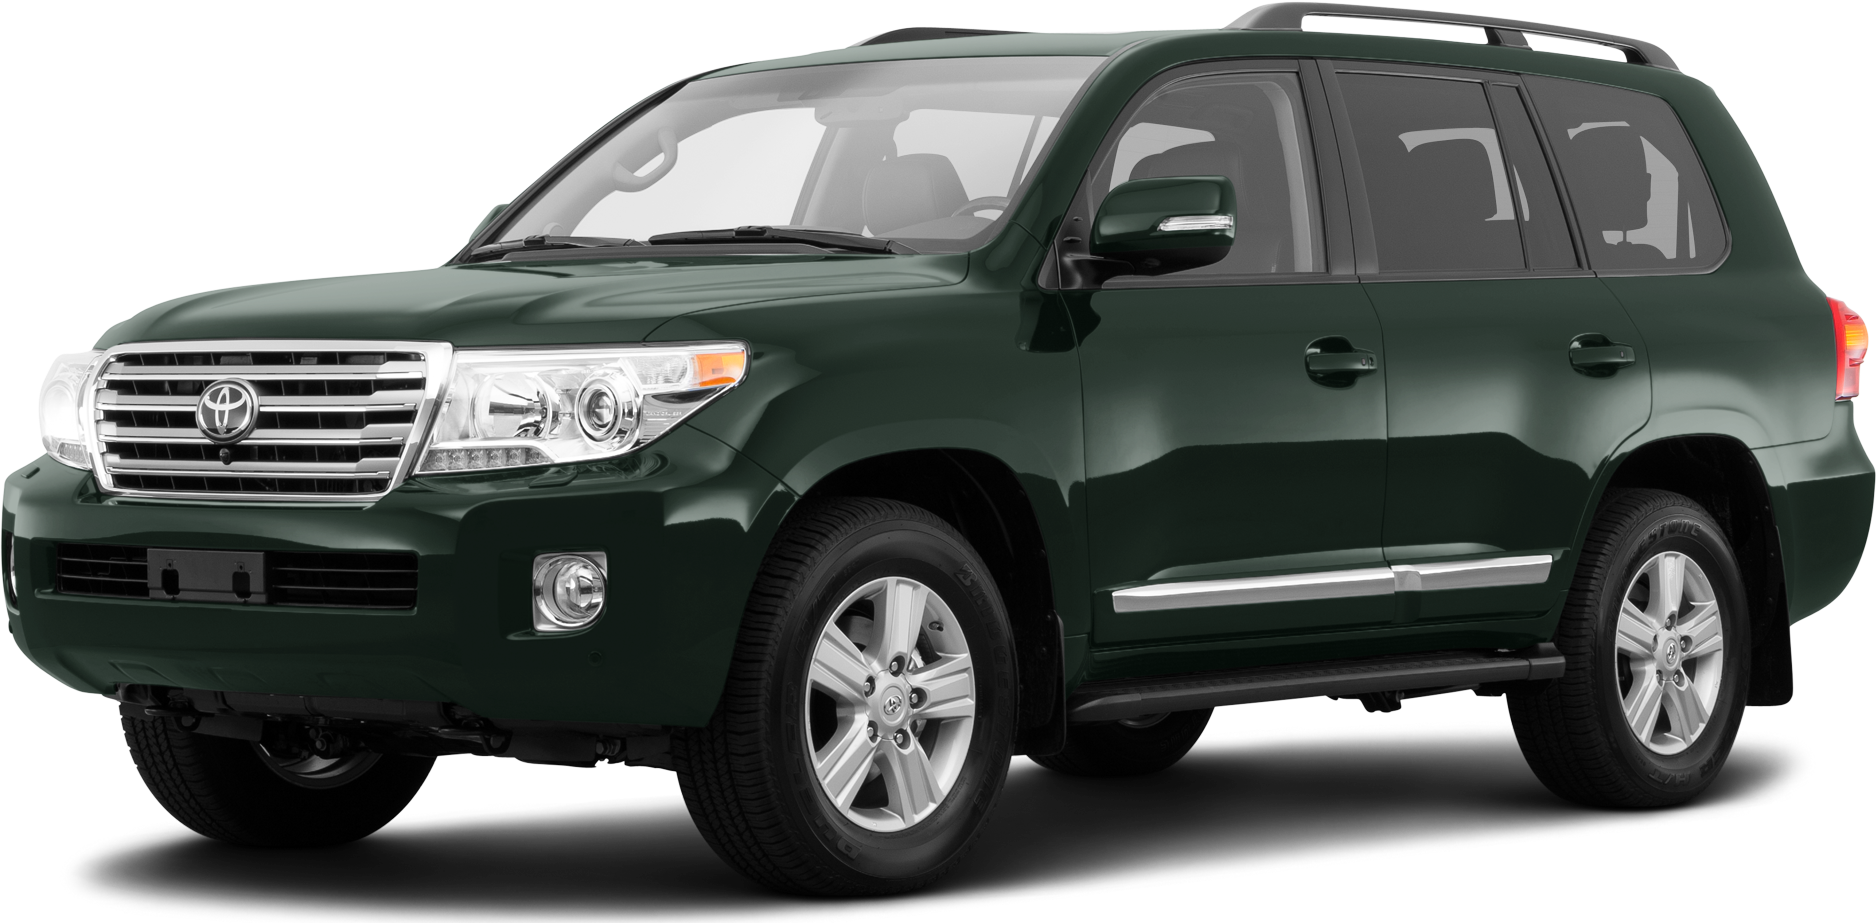 14 Toyota Land Cruiser Values Cars For Sale Kelley Blue Book